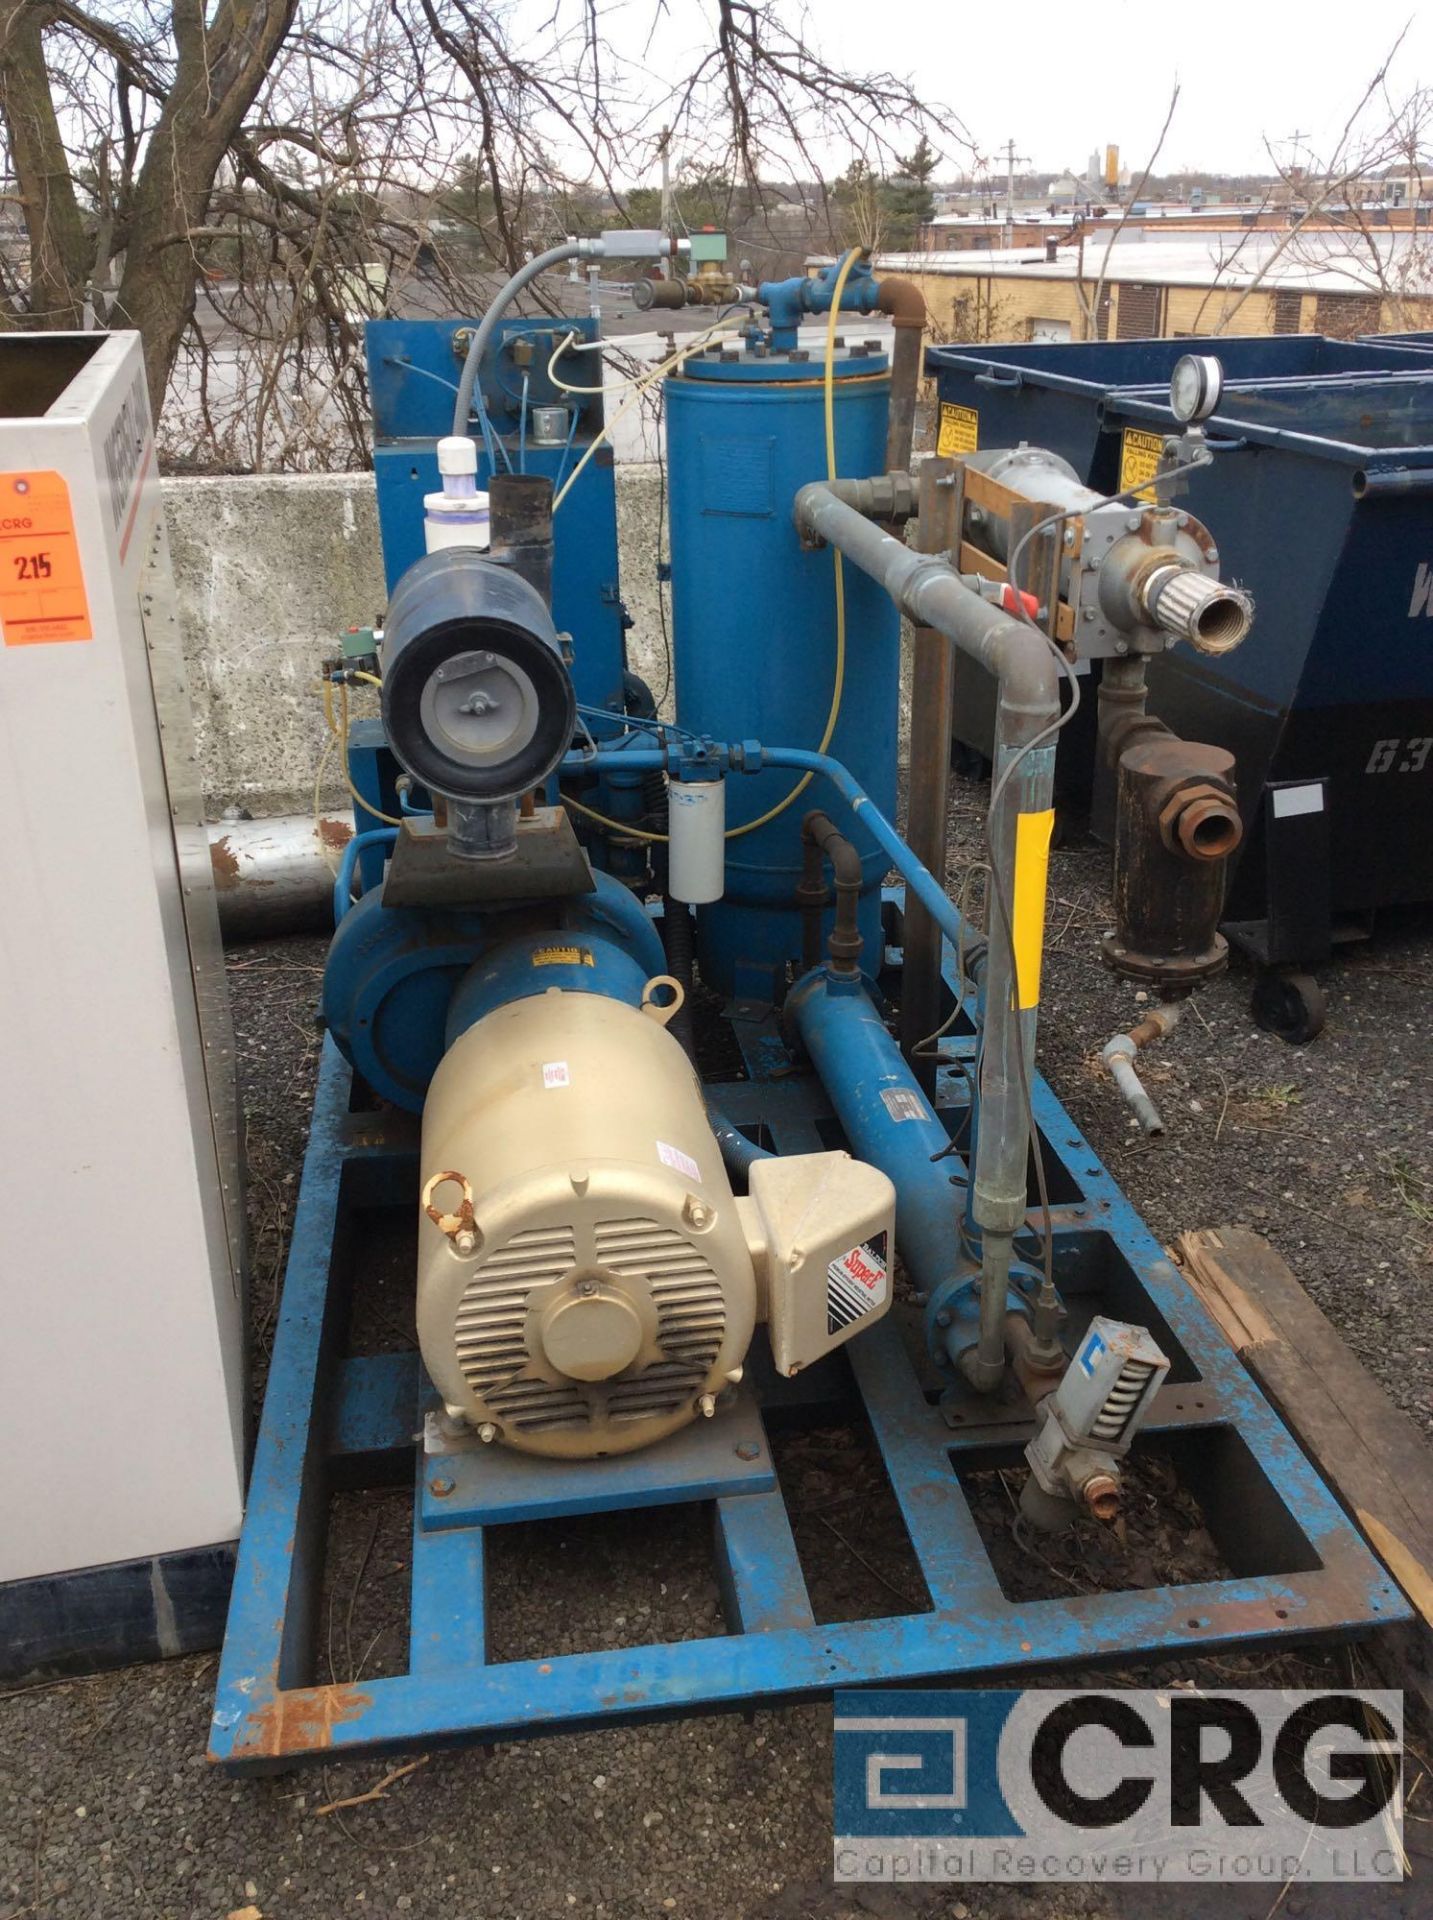 Quincy skid mount air compressor, 50 hp, mn Q235, sn 32060 (LOCATED HARRISON AVE) - Image 3 of 3